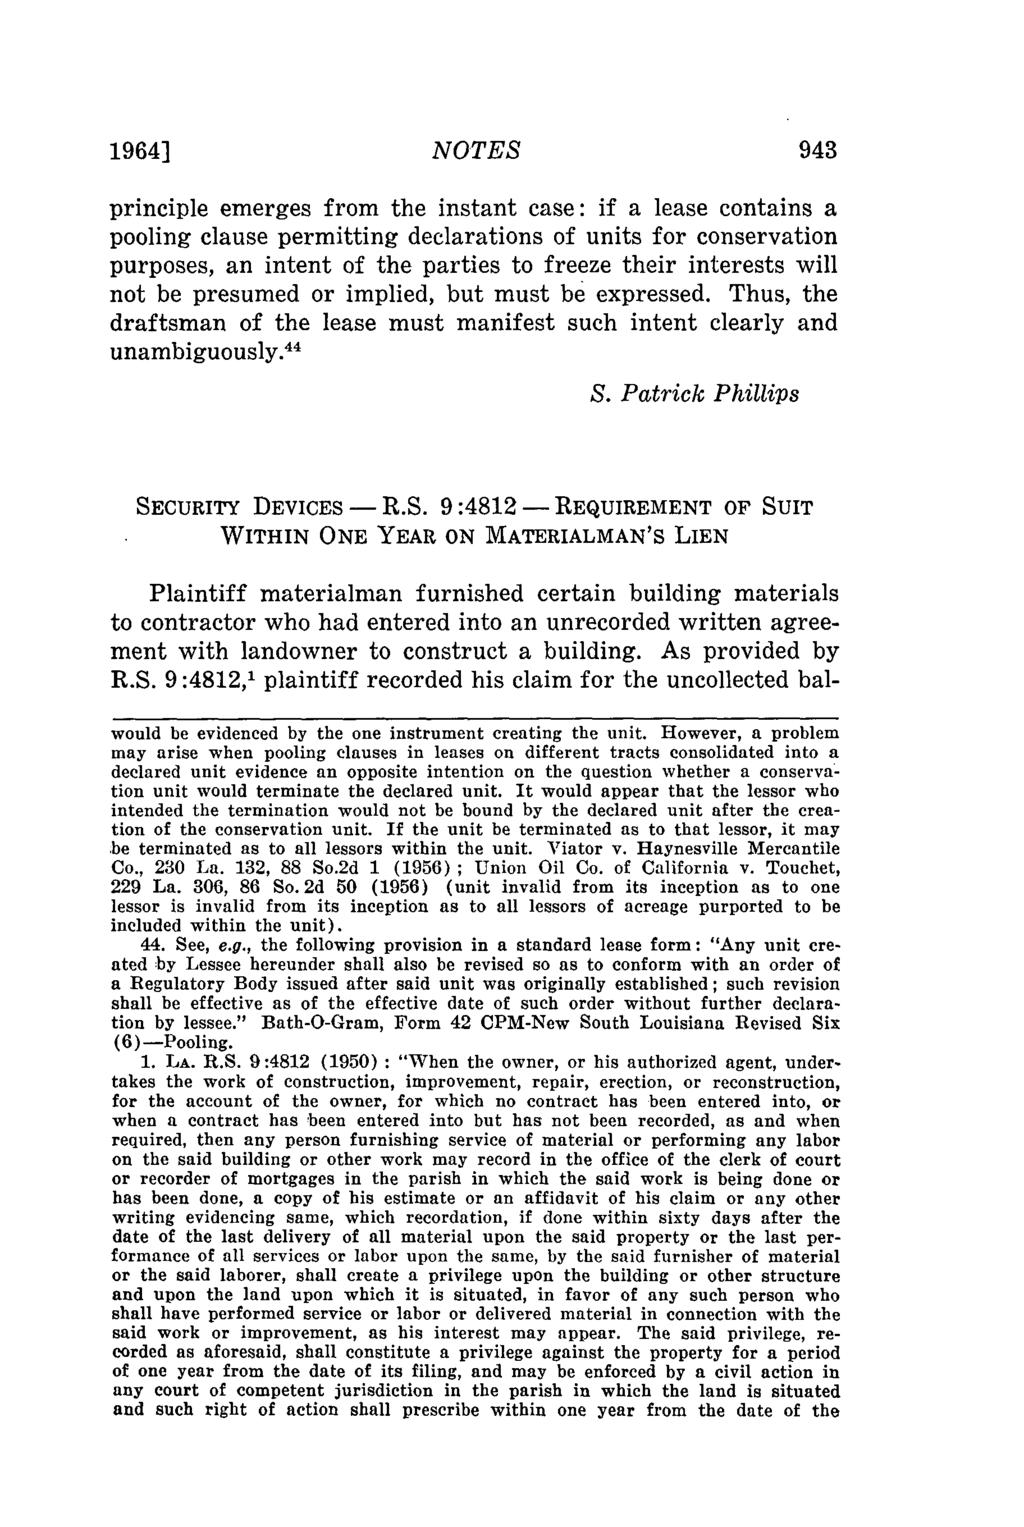 1964] NOTES principle emerges from the instant case: if a lease contains a pooling clause permitting declarations of units for conservation purposes, an intent of the parties to freeze their